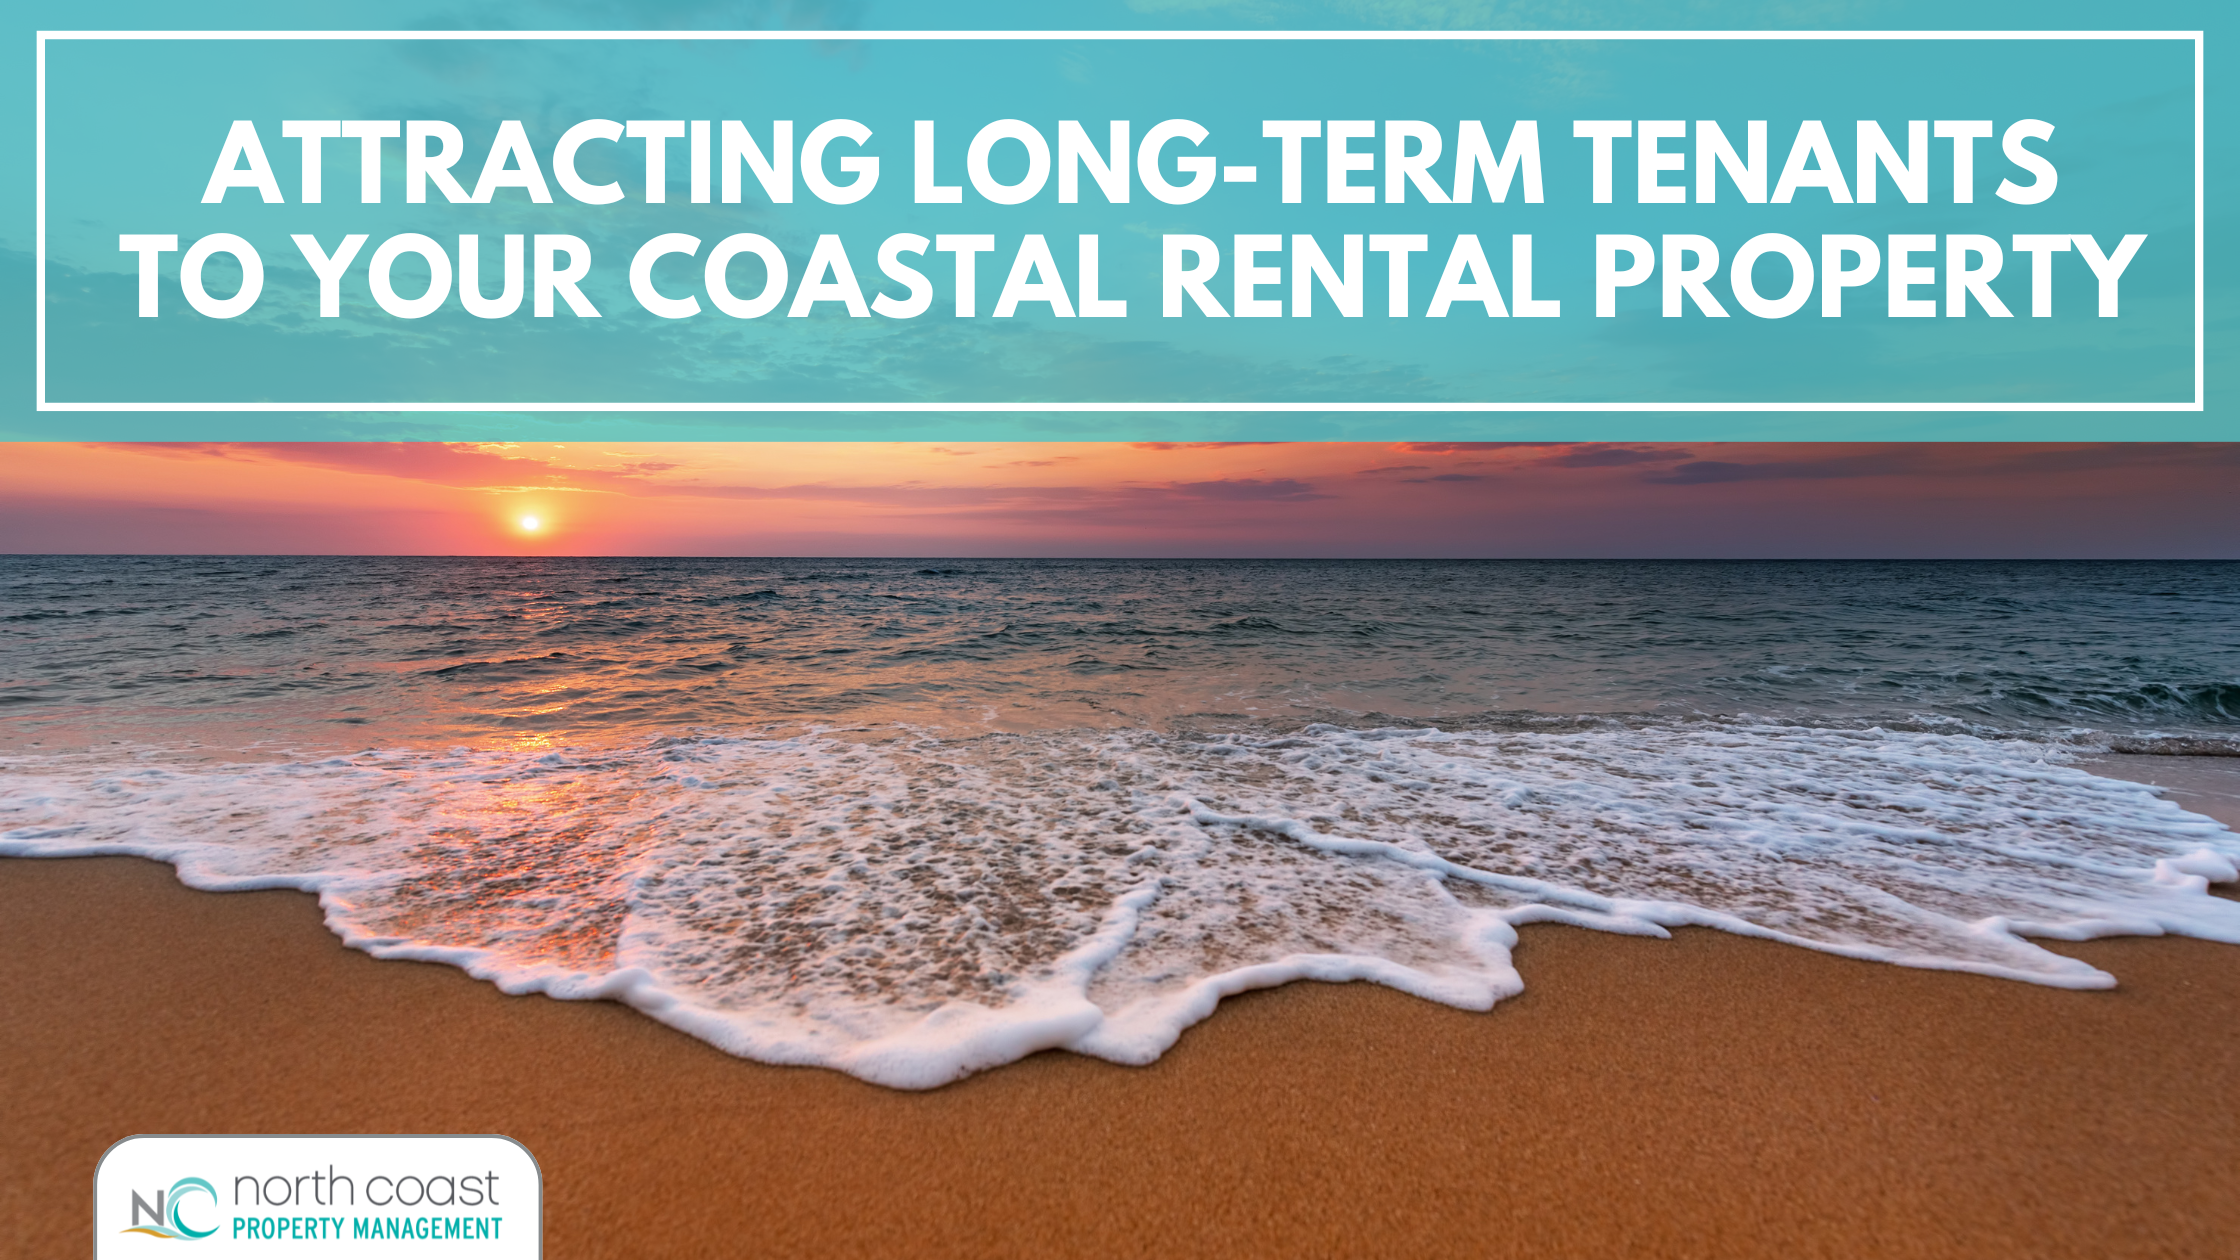 Attracting Long-Term Tenants to Your Coastal Rental Property